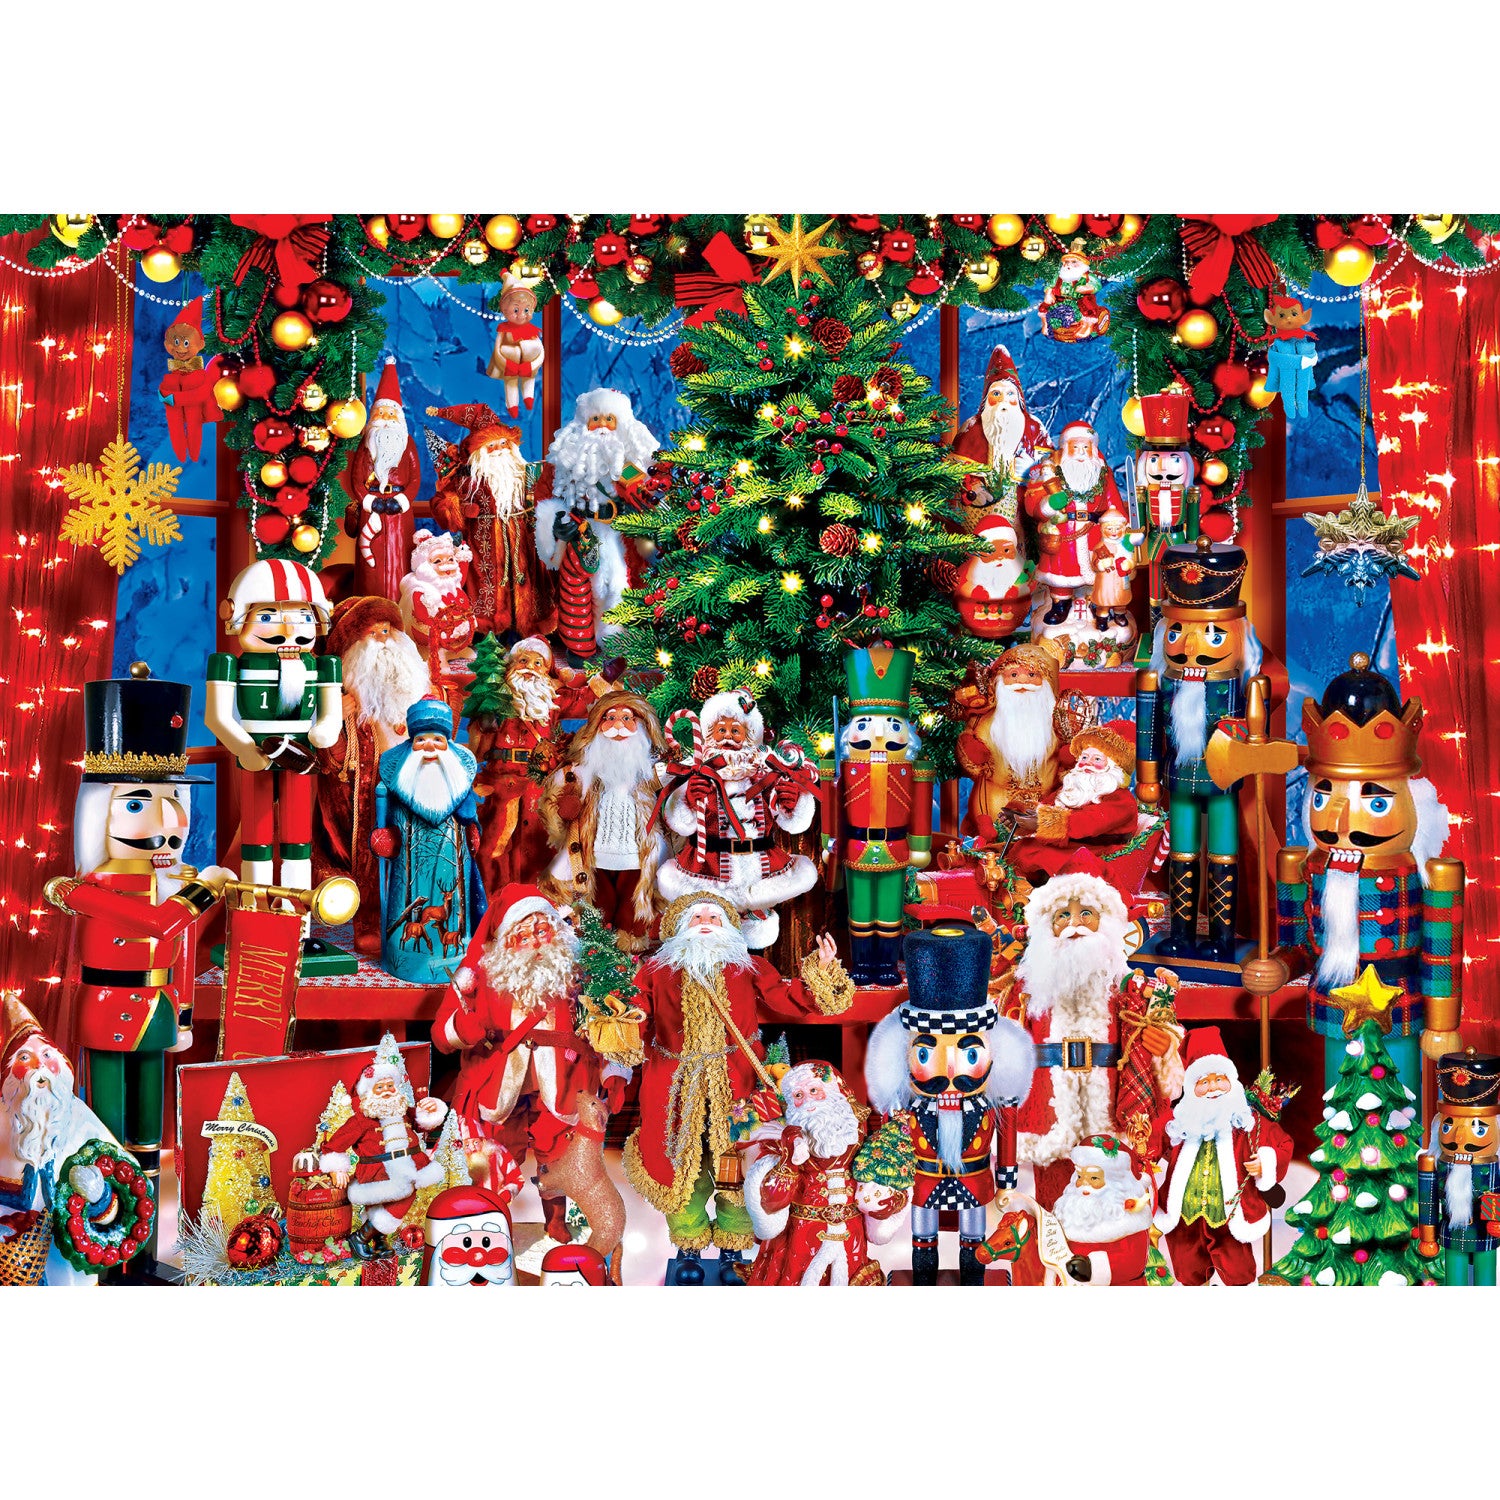 Holiday Glitter - Holiday Festivities 500 Piece Puzzle